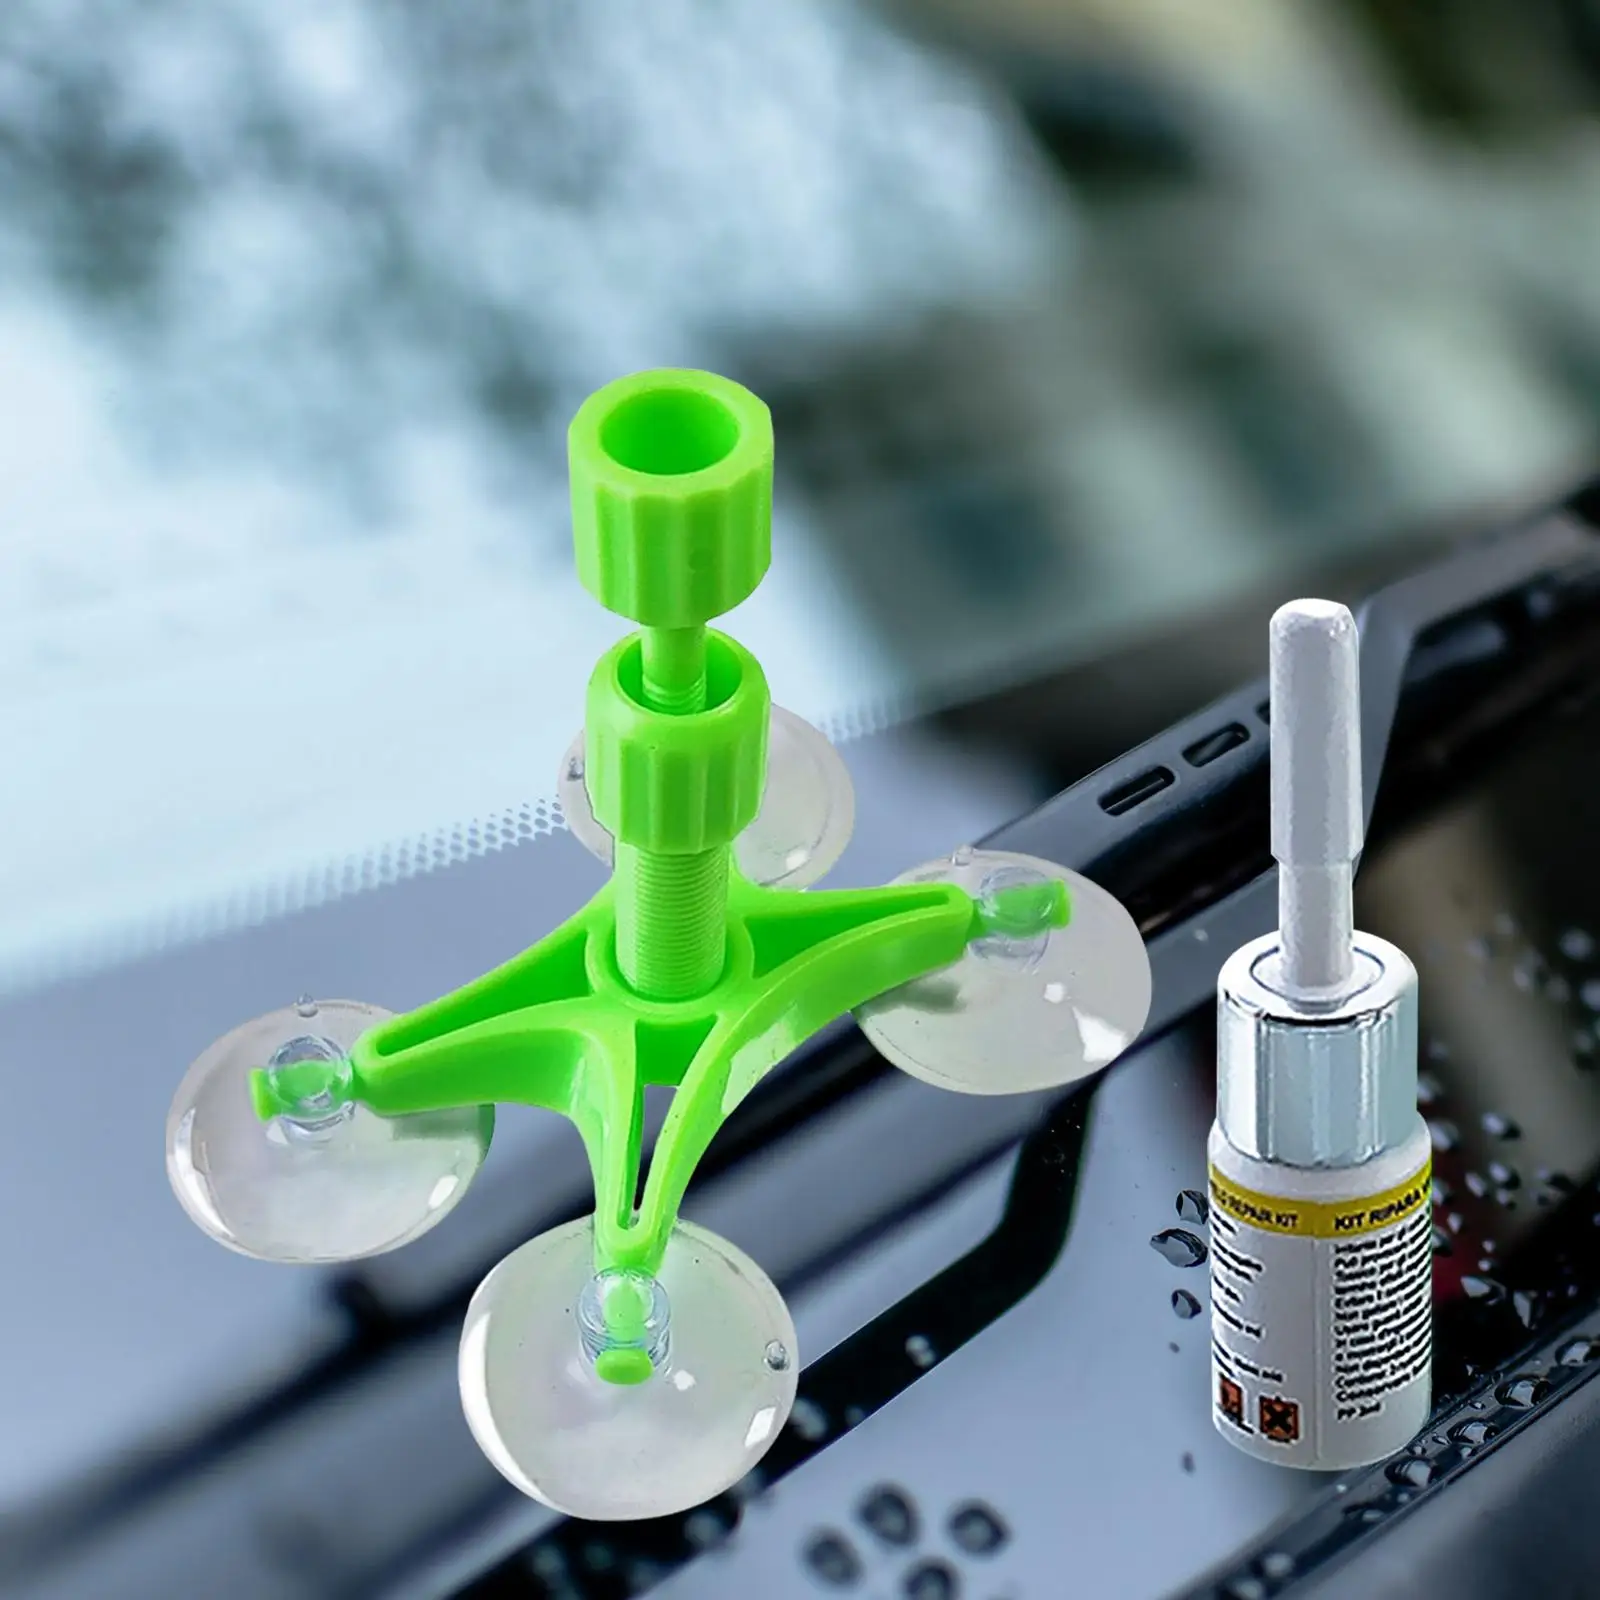 Car Windshield Repair Kit, , to Fix Auto Glass Windshield Crack Chip Scratch DIY Easy to Operate Widely Use